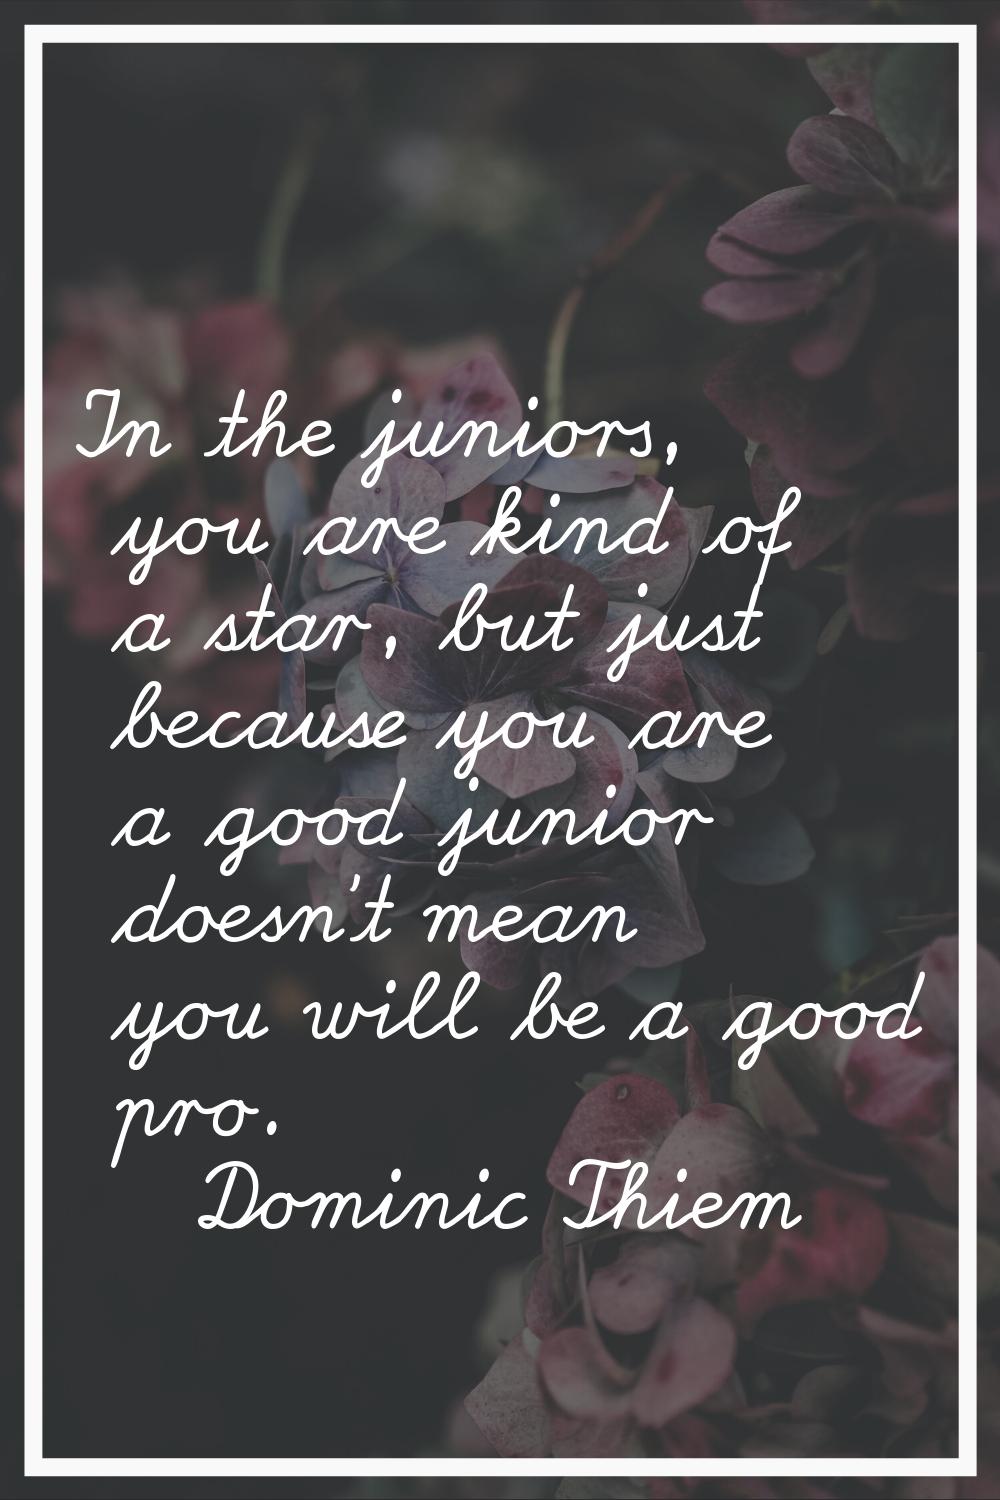 In the juniors, you are kind of a star, but just because you are a good junior doesn't mean you wil